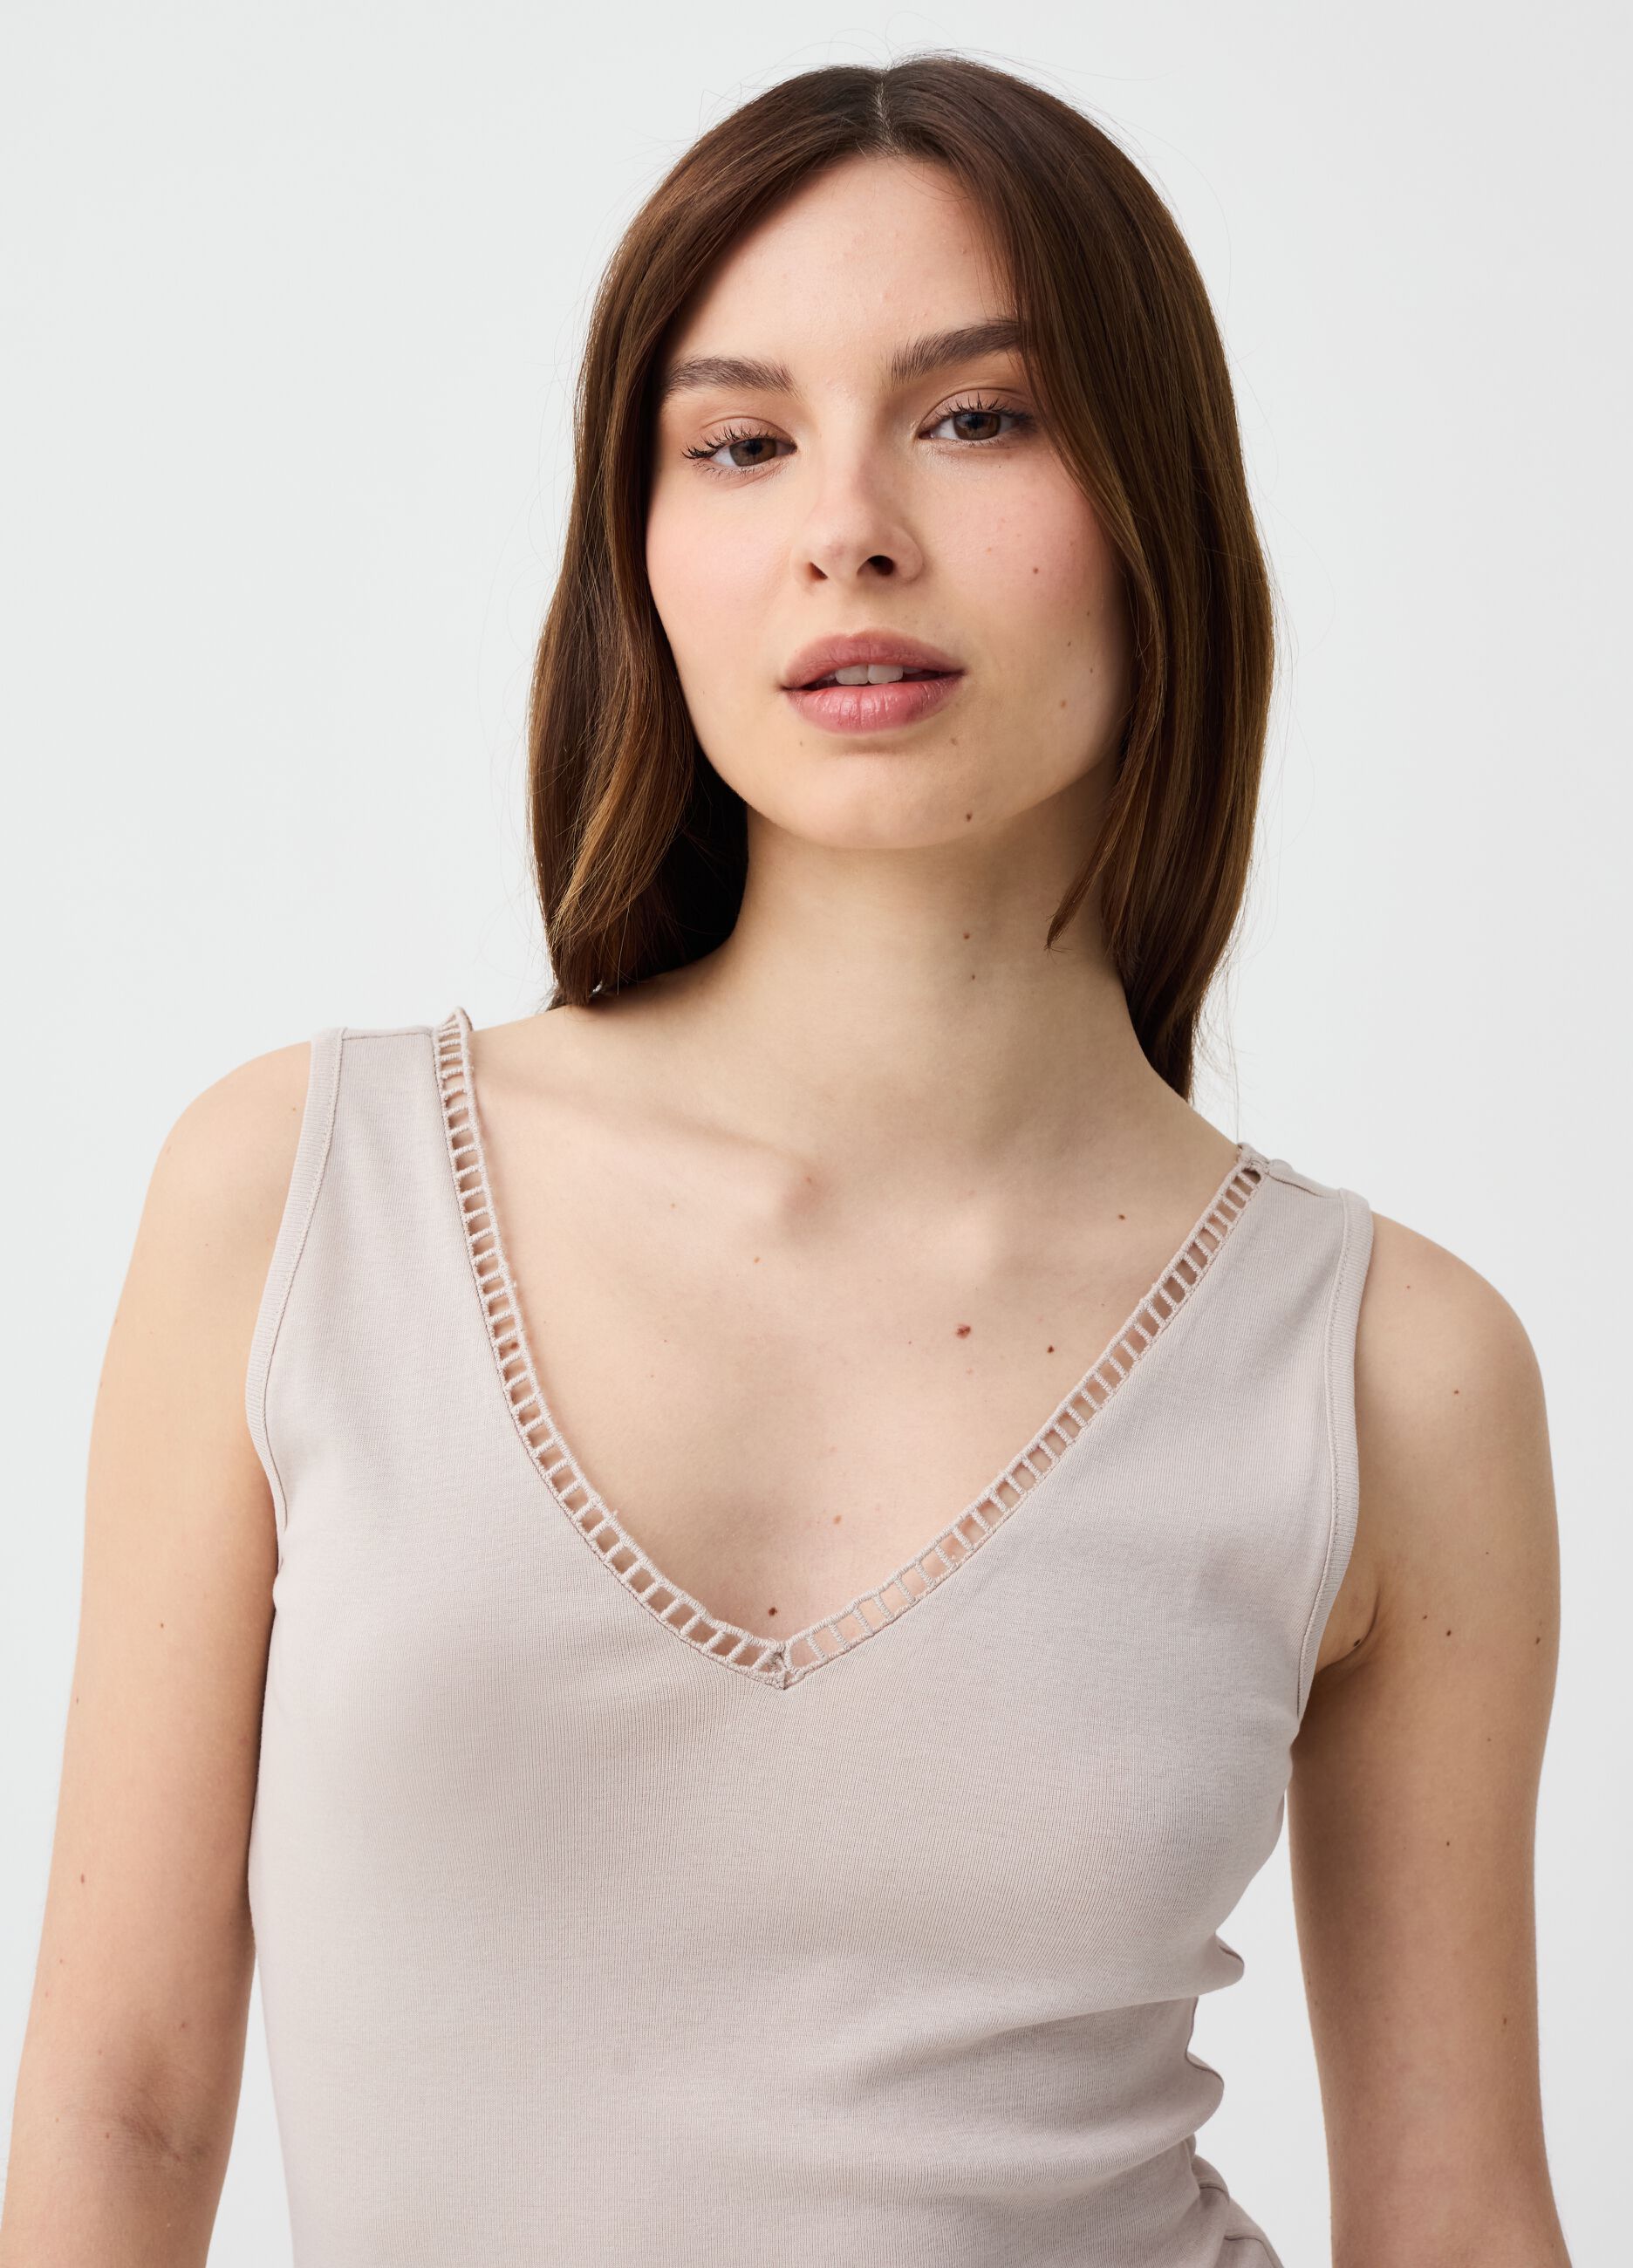 Tank top with V neck and openwork edging